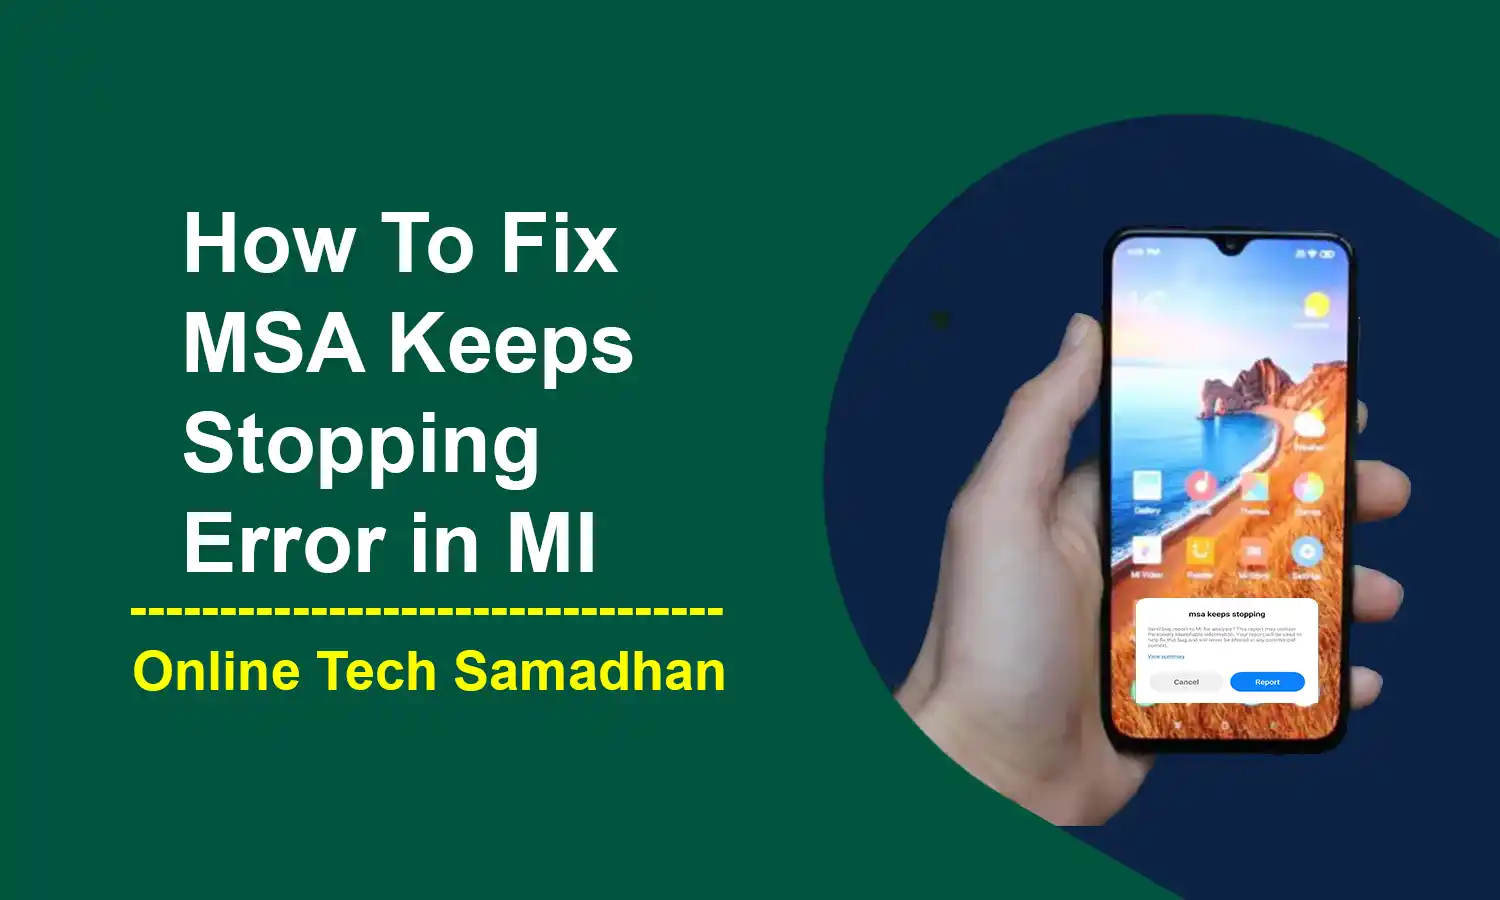 How To Fix MSA Keeps Stopping Error in MI